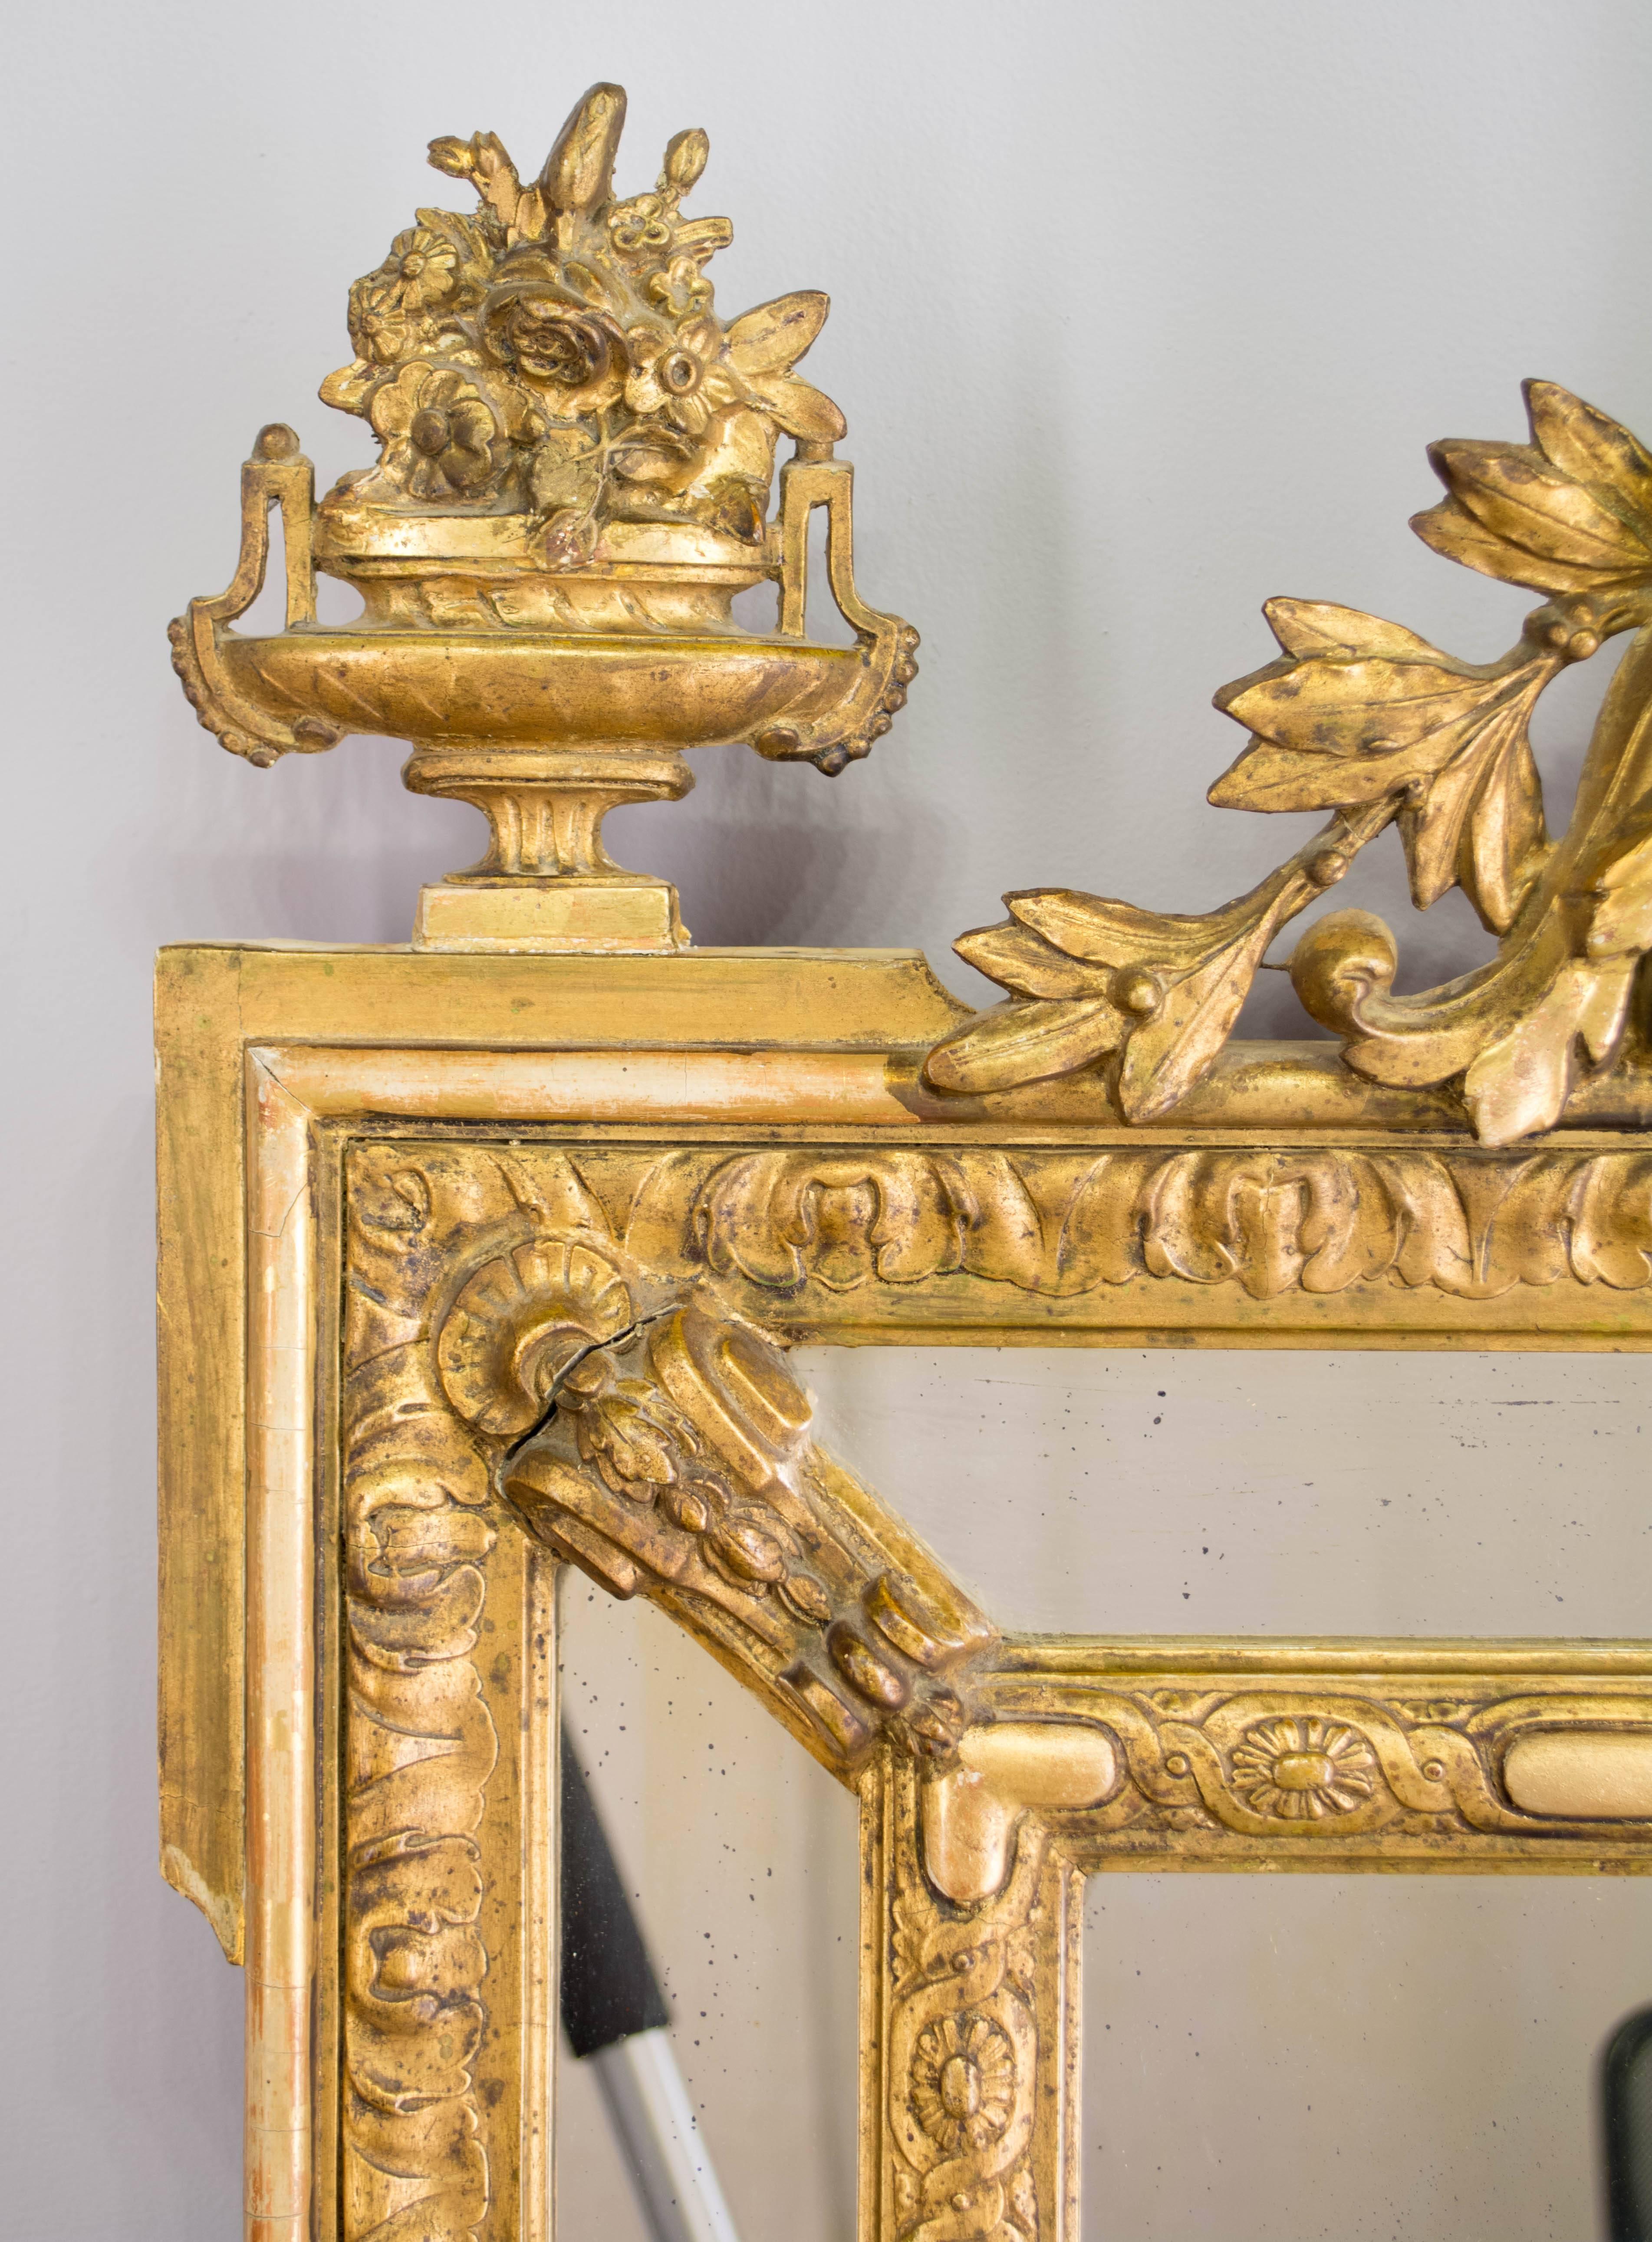 19th century Napoleon III gilded mirror. Elaborately detailed crest with carved putti and flower baskets. Bright gilt with minor touch-ups. Original looking glass has old silvering streaks. 
More photos available upon request. We have a large